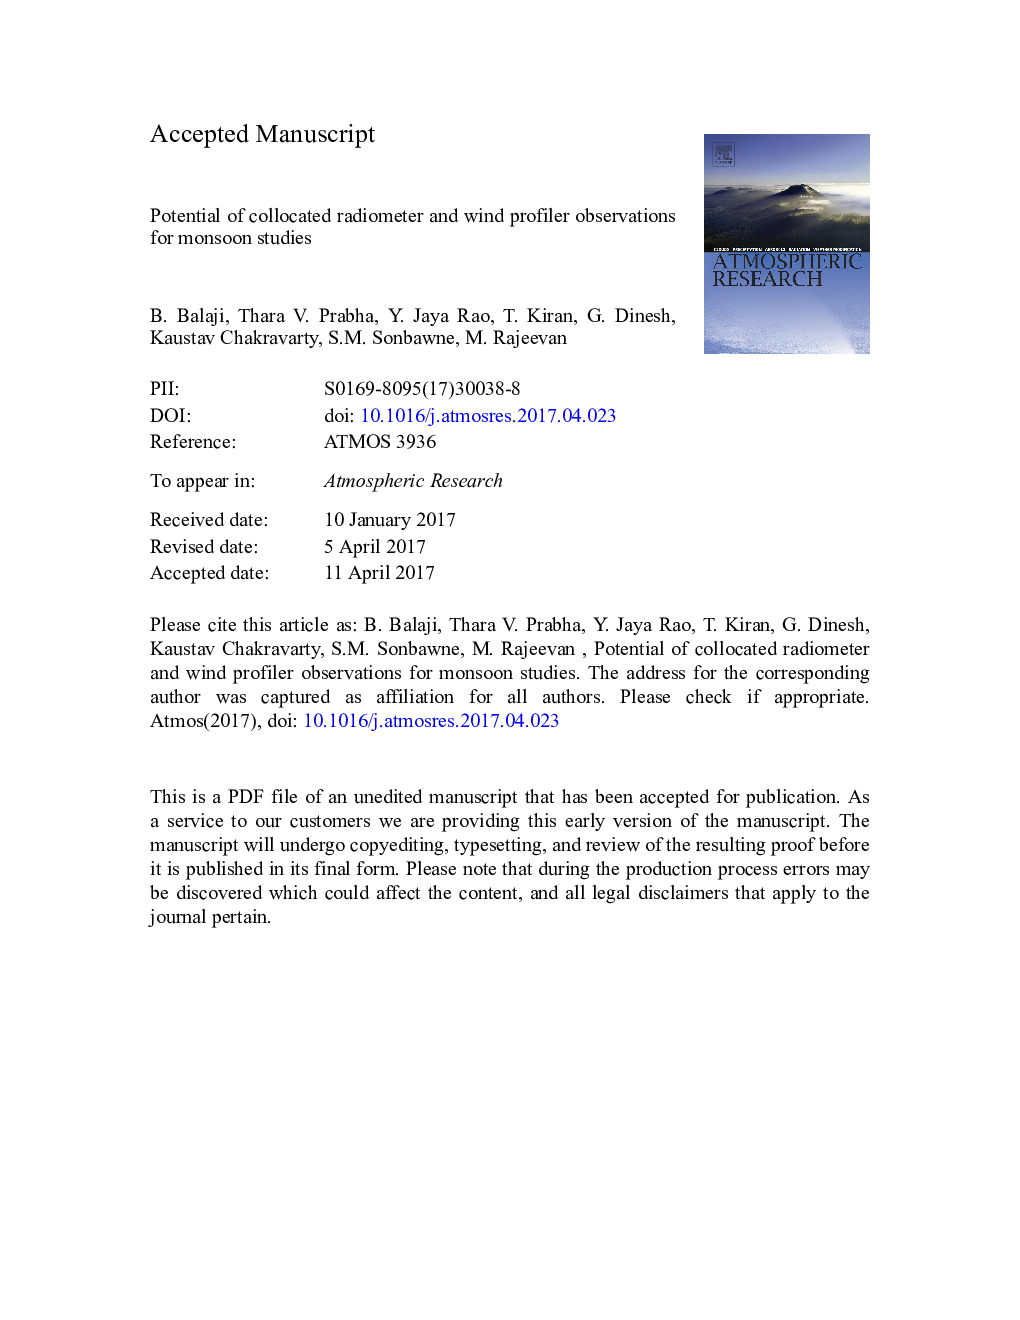 Potential of collocated radiometer and wind profiler observations for monsoon studies